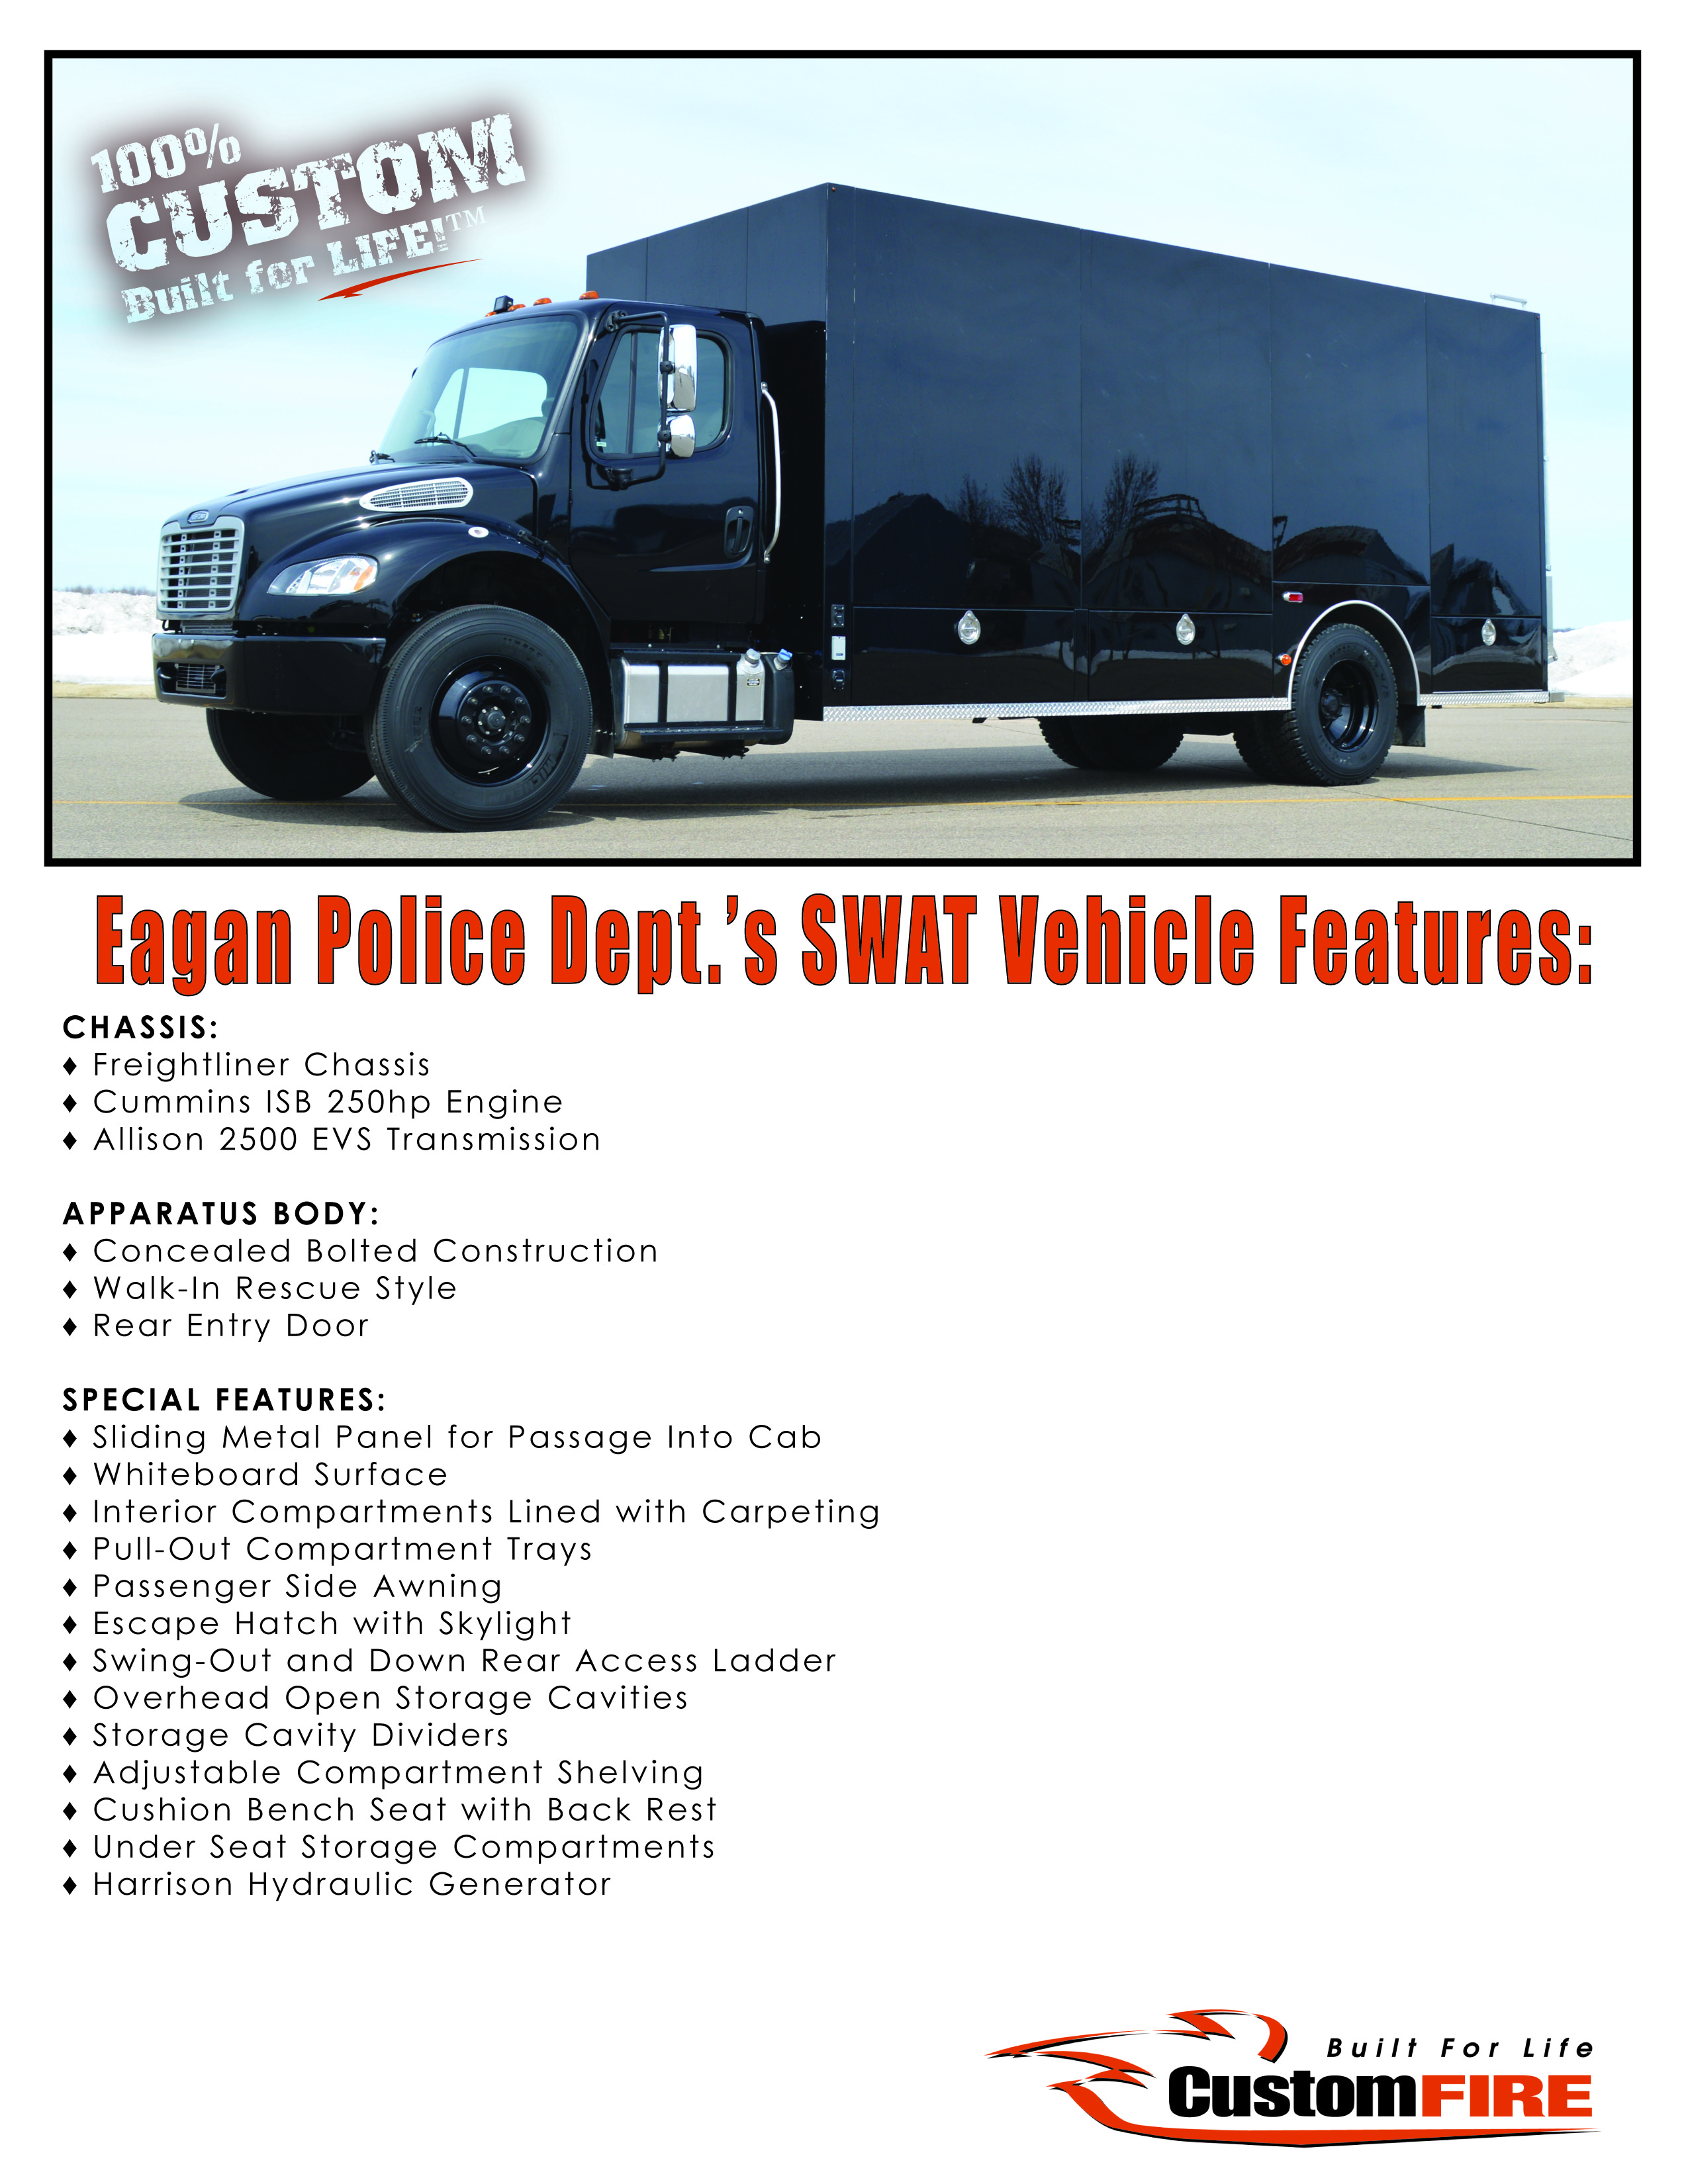 SWAT Truck Police Black Custom Model Built and Compatible with